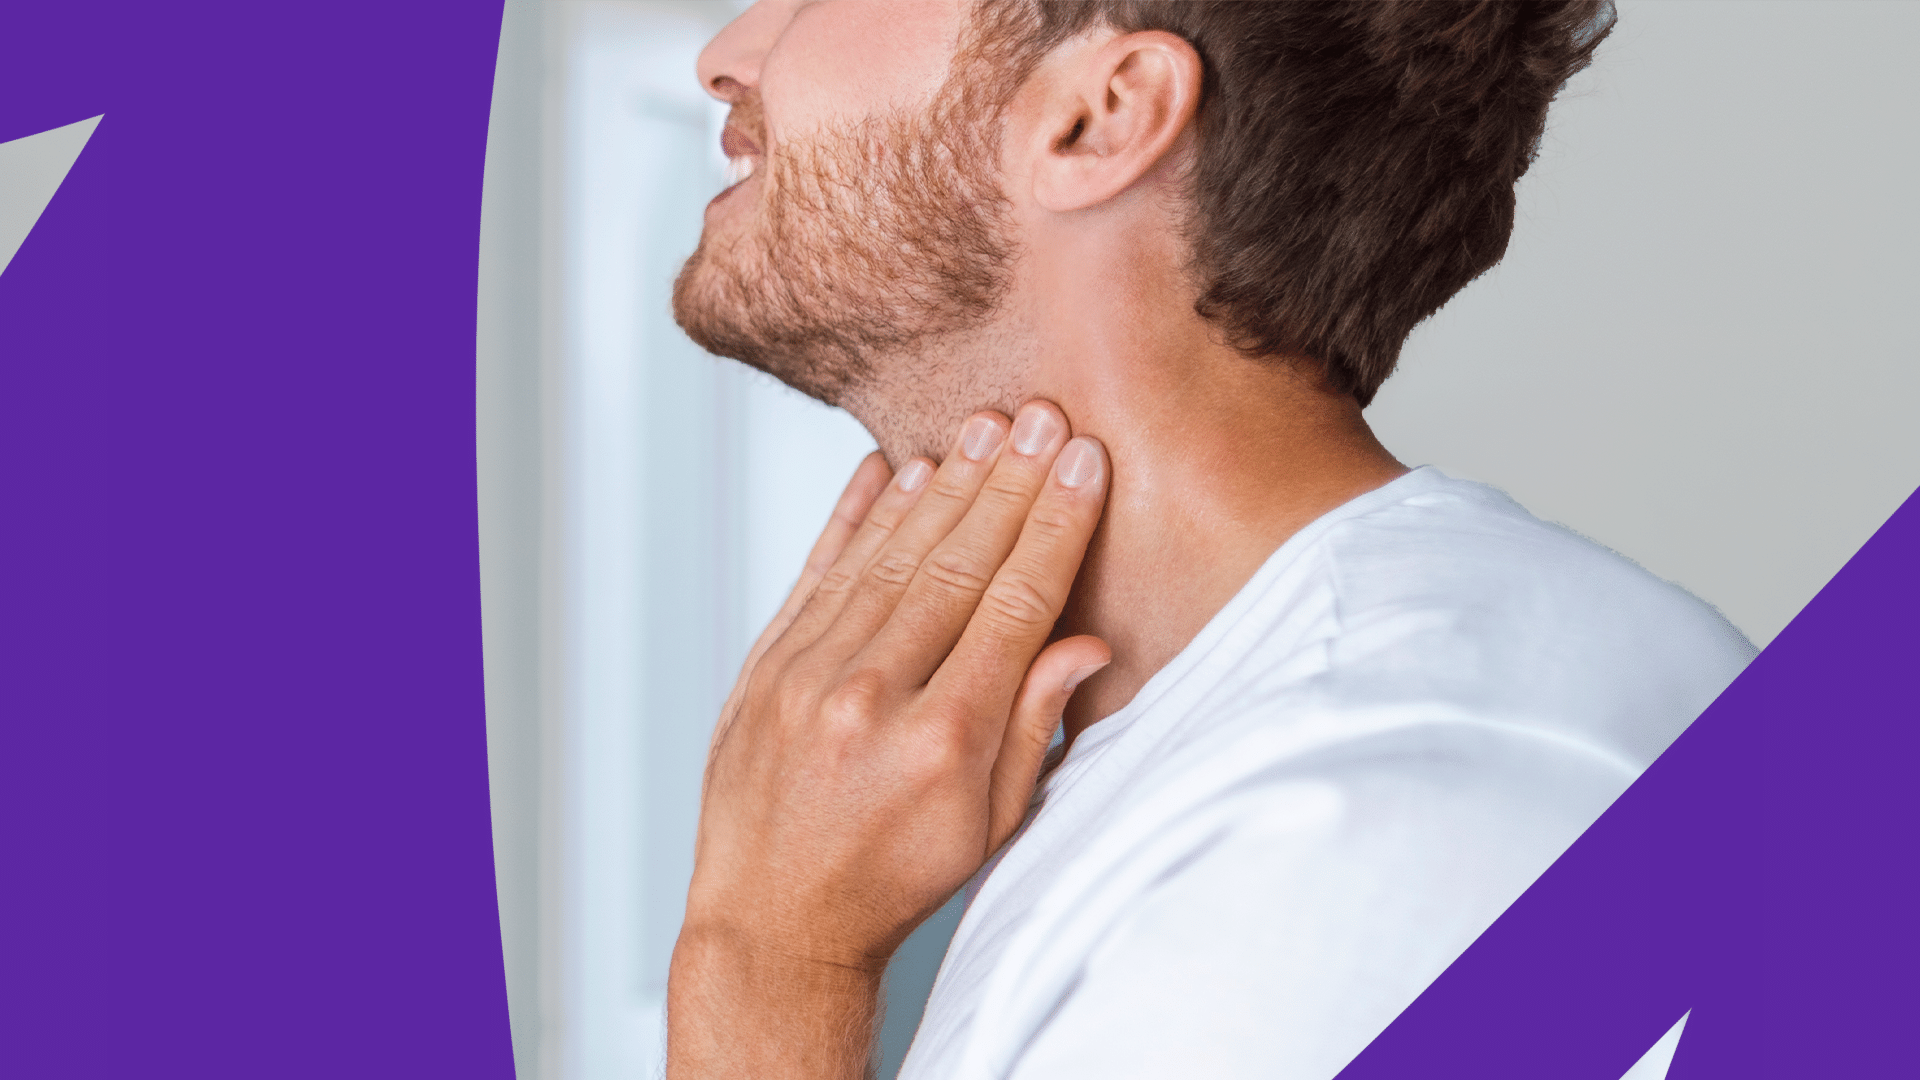 What causes swollen lymph nodes? Related conditions and treatments